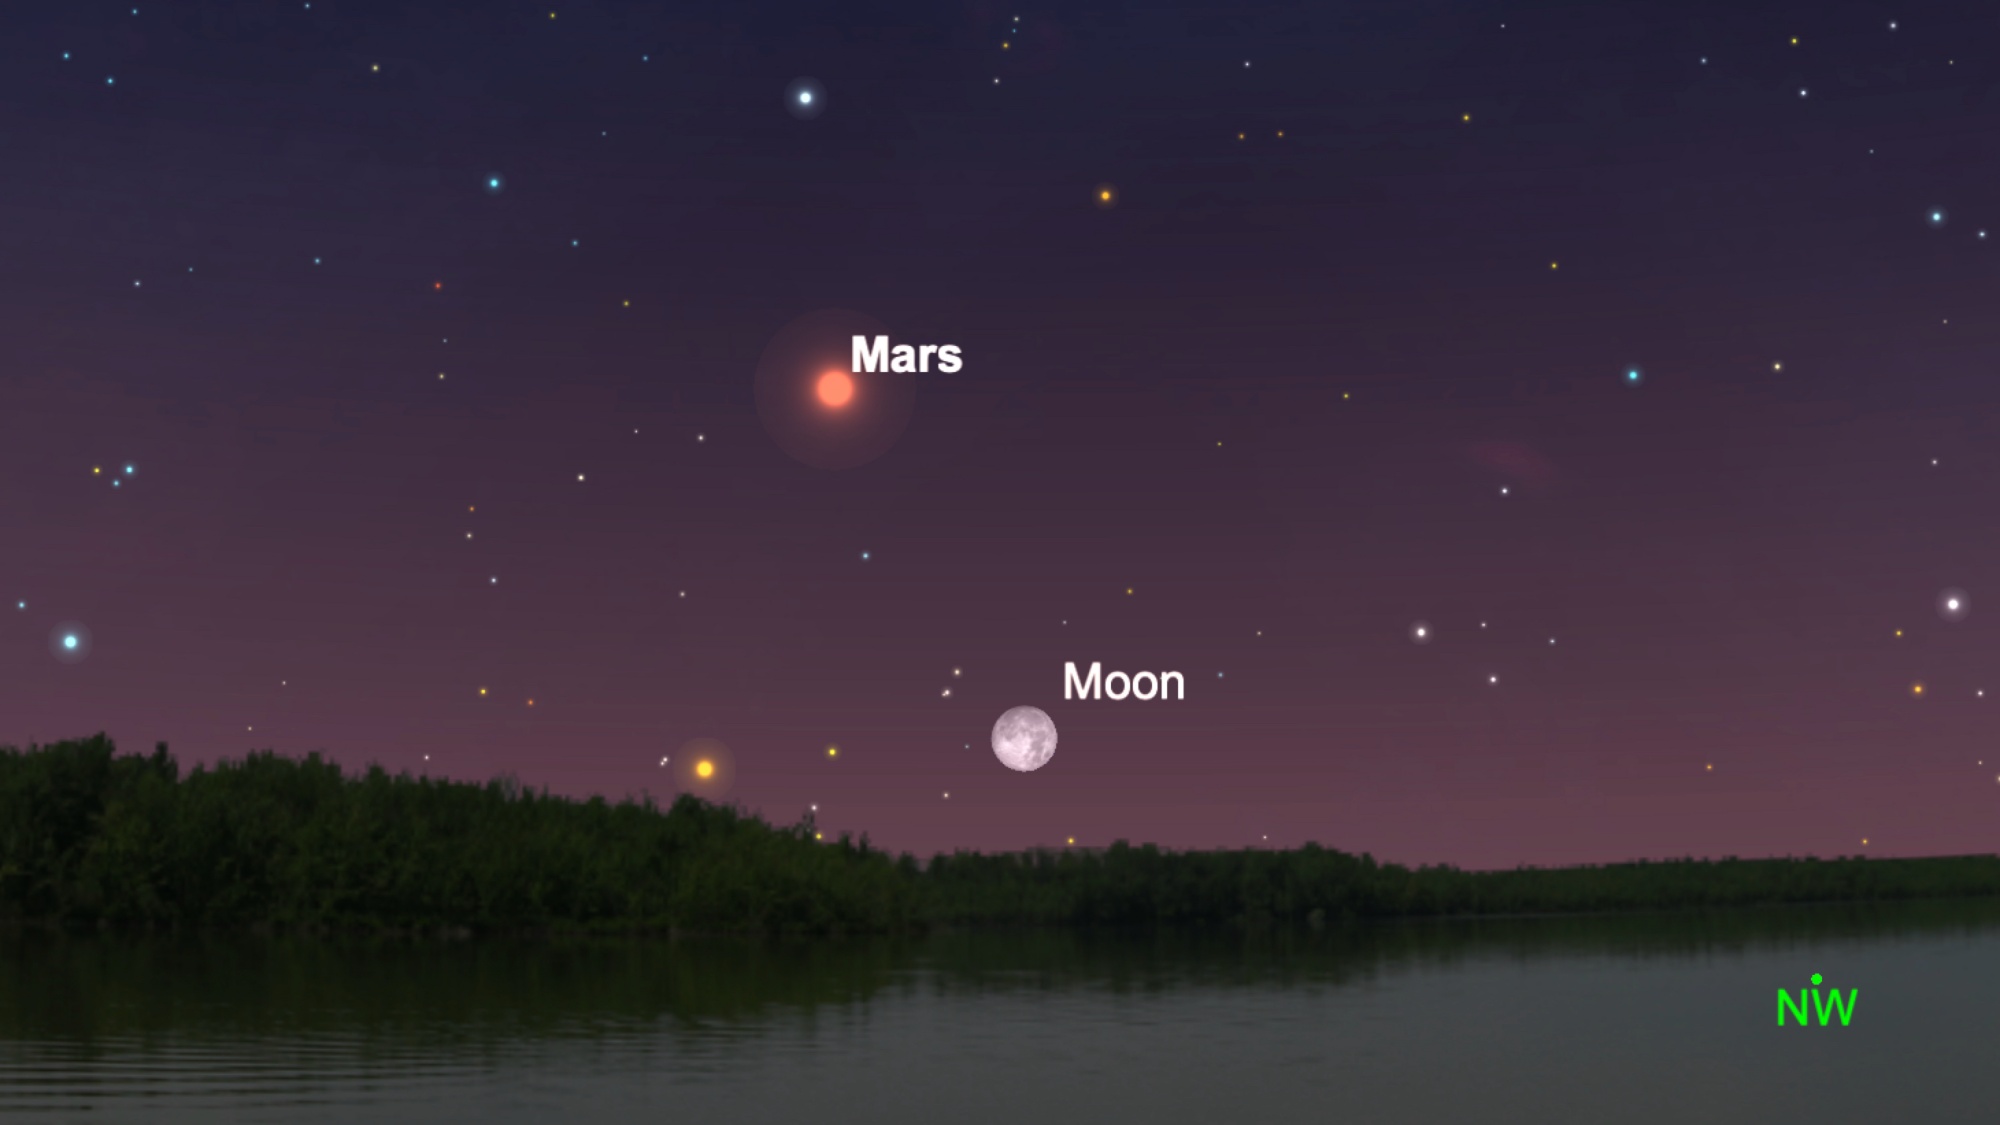 Mars at opposition will meet up with the full moon next week (Dec. 7). Here's how to see it